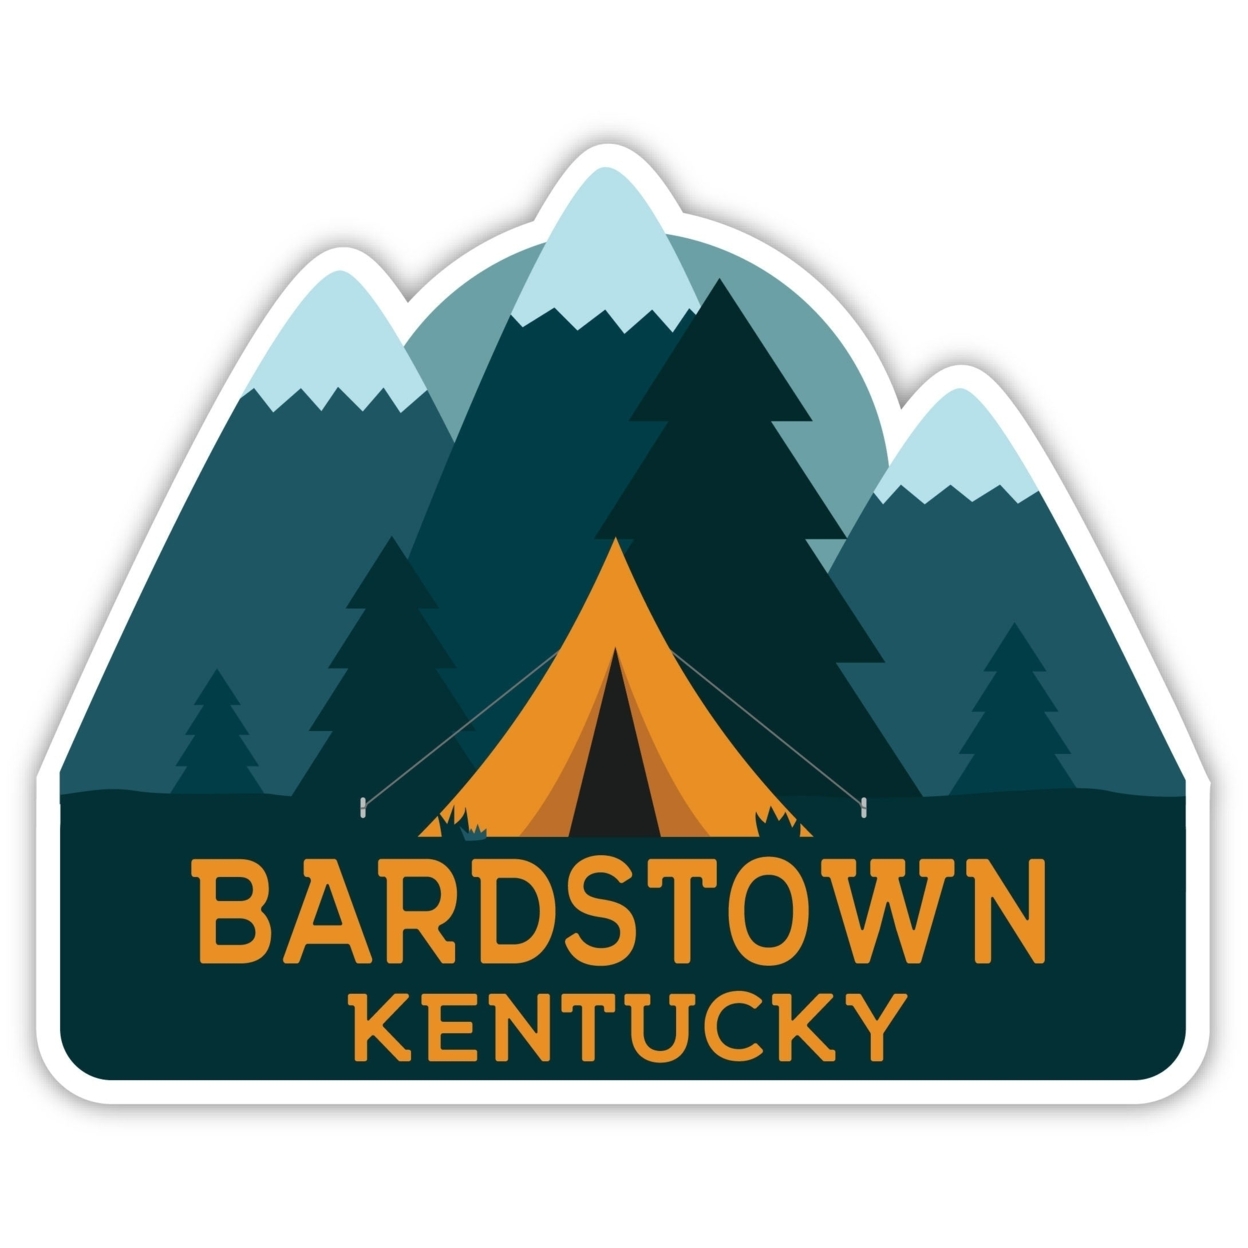 Bardstown Kentucky Souvenir Decorative Stickers (Choose Theme And Size) - 4-Pack, 10-Inch, Tent